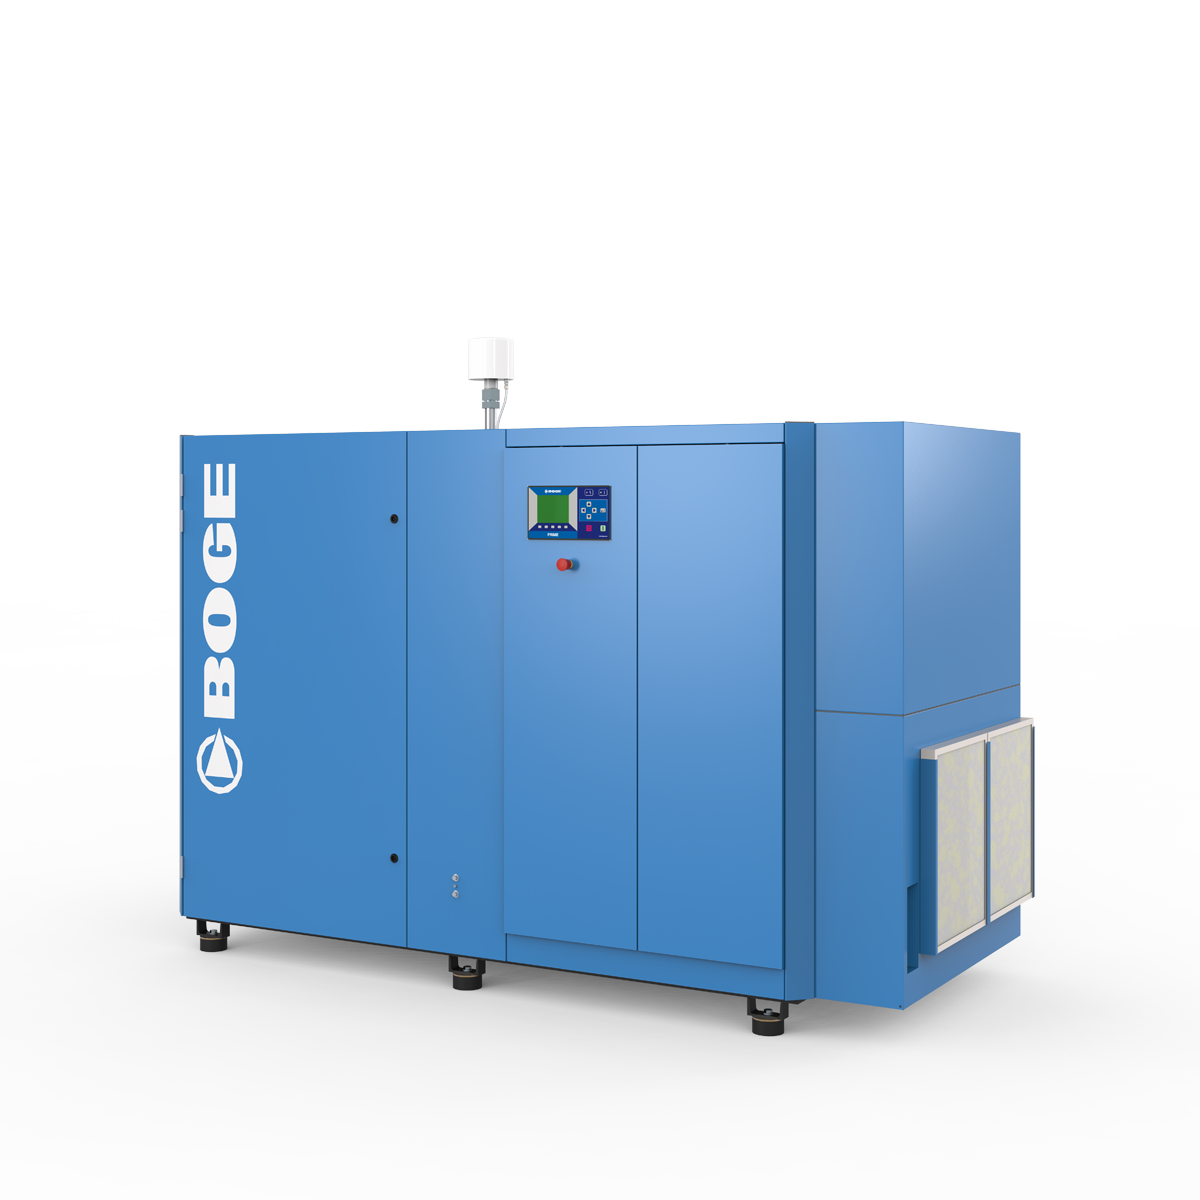 Screw Compressor SO...F series up to 125 hp variable speed